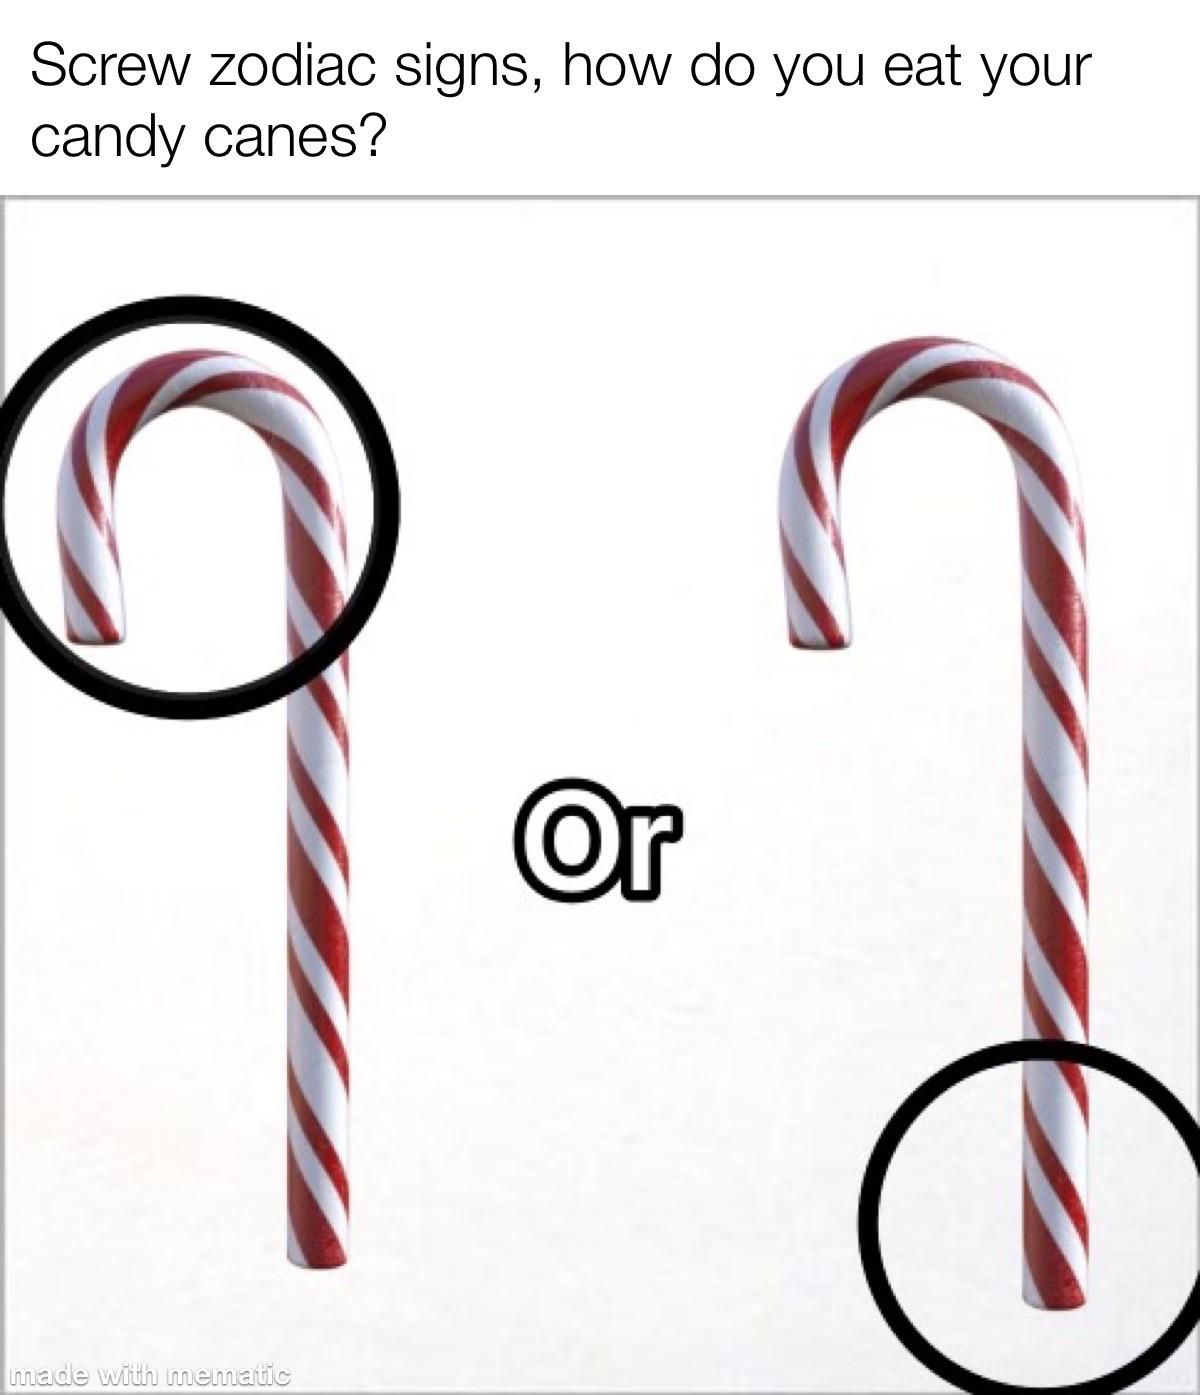 funny memes and pics - fashion accessory - Screw zodiac signs, how do you eat your candy canes? made with mematic Or